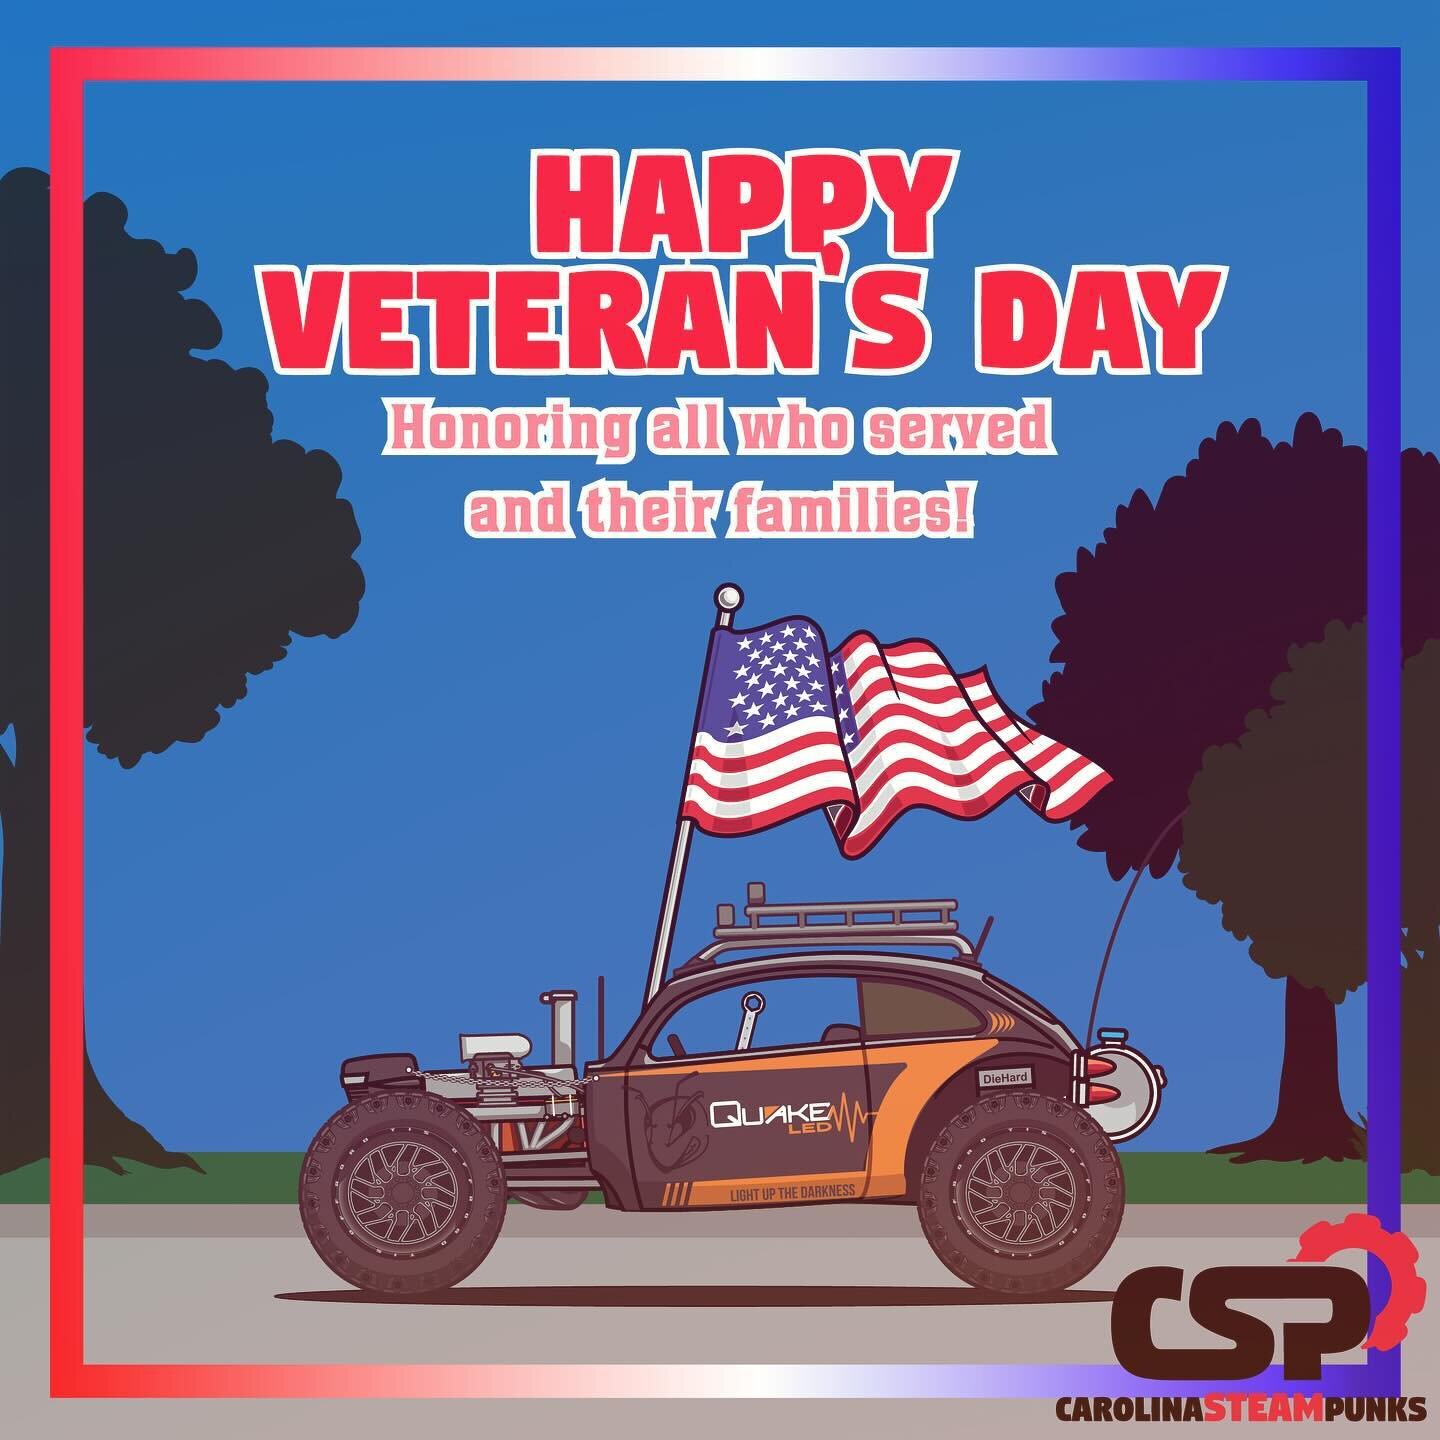 Happy Veterans Day to those who served and those who supported them. Thank you for your service!!!
#thankful #usmilitary #army #airforce #marines #navy #coastguard @quakeled @herculestires @ds18audio @advanceautoparts @valkdesignsolutions @outcastcus